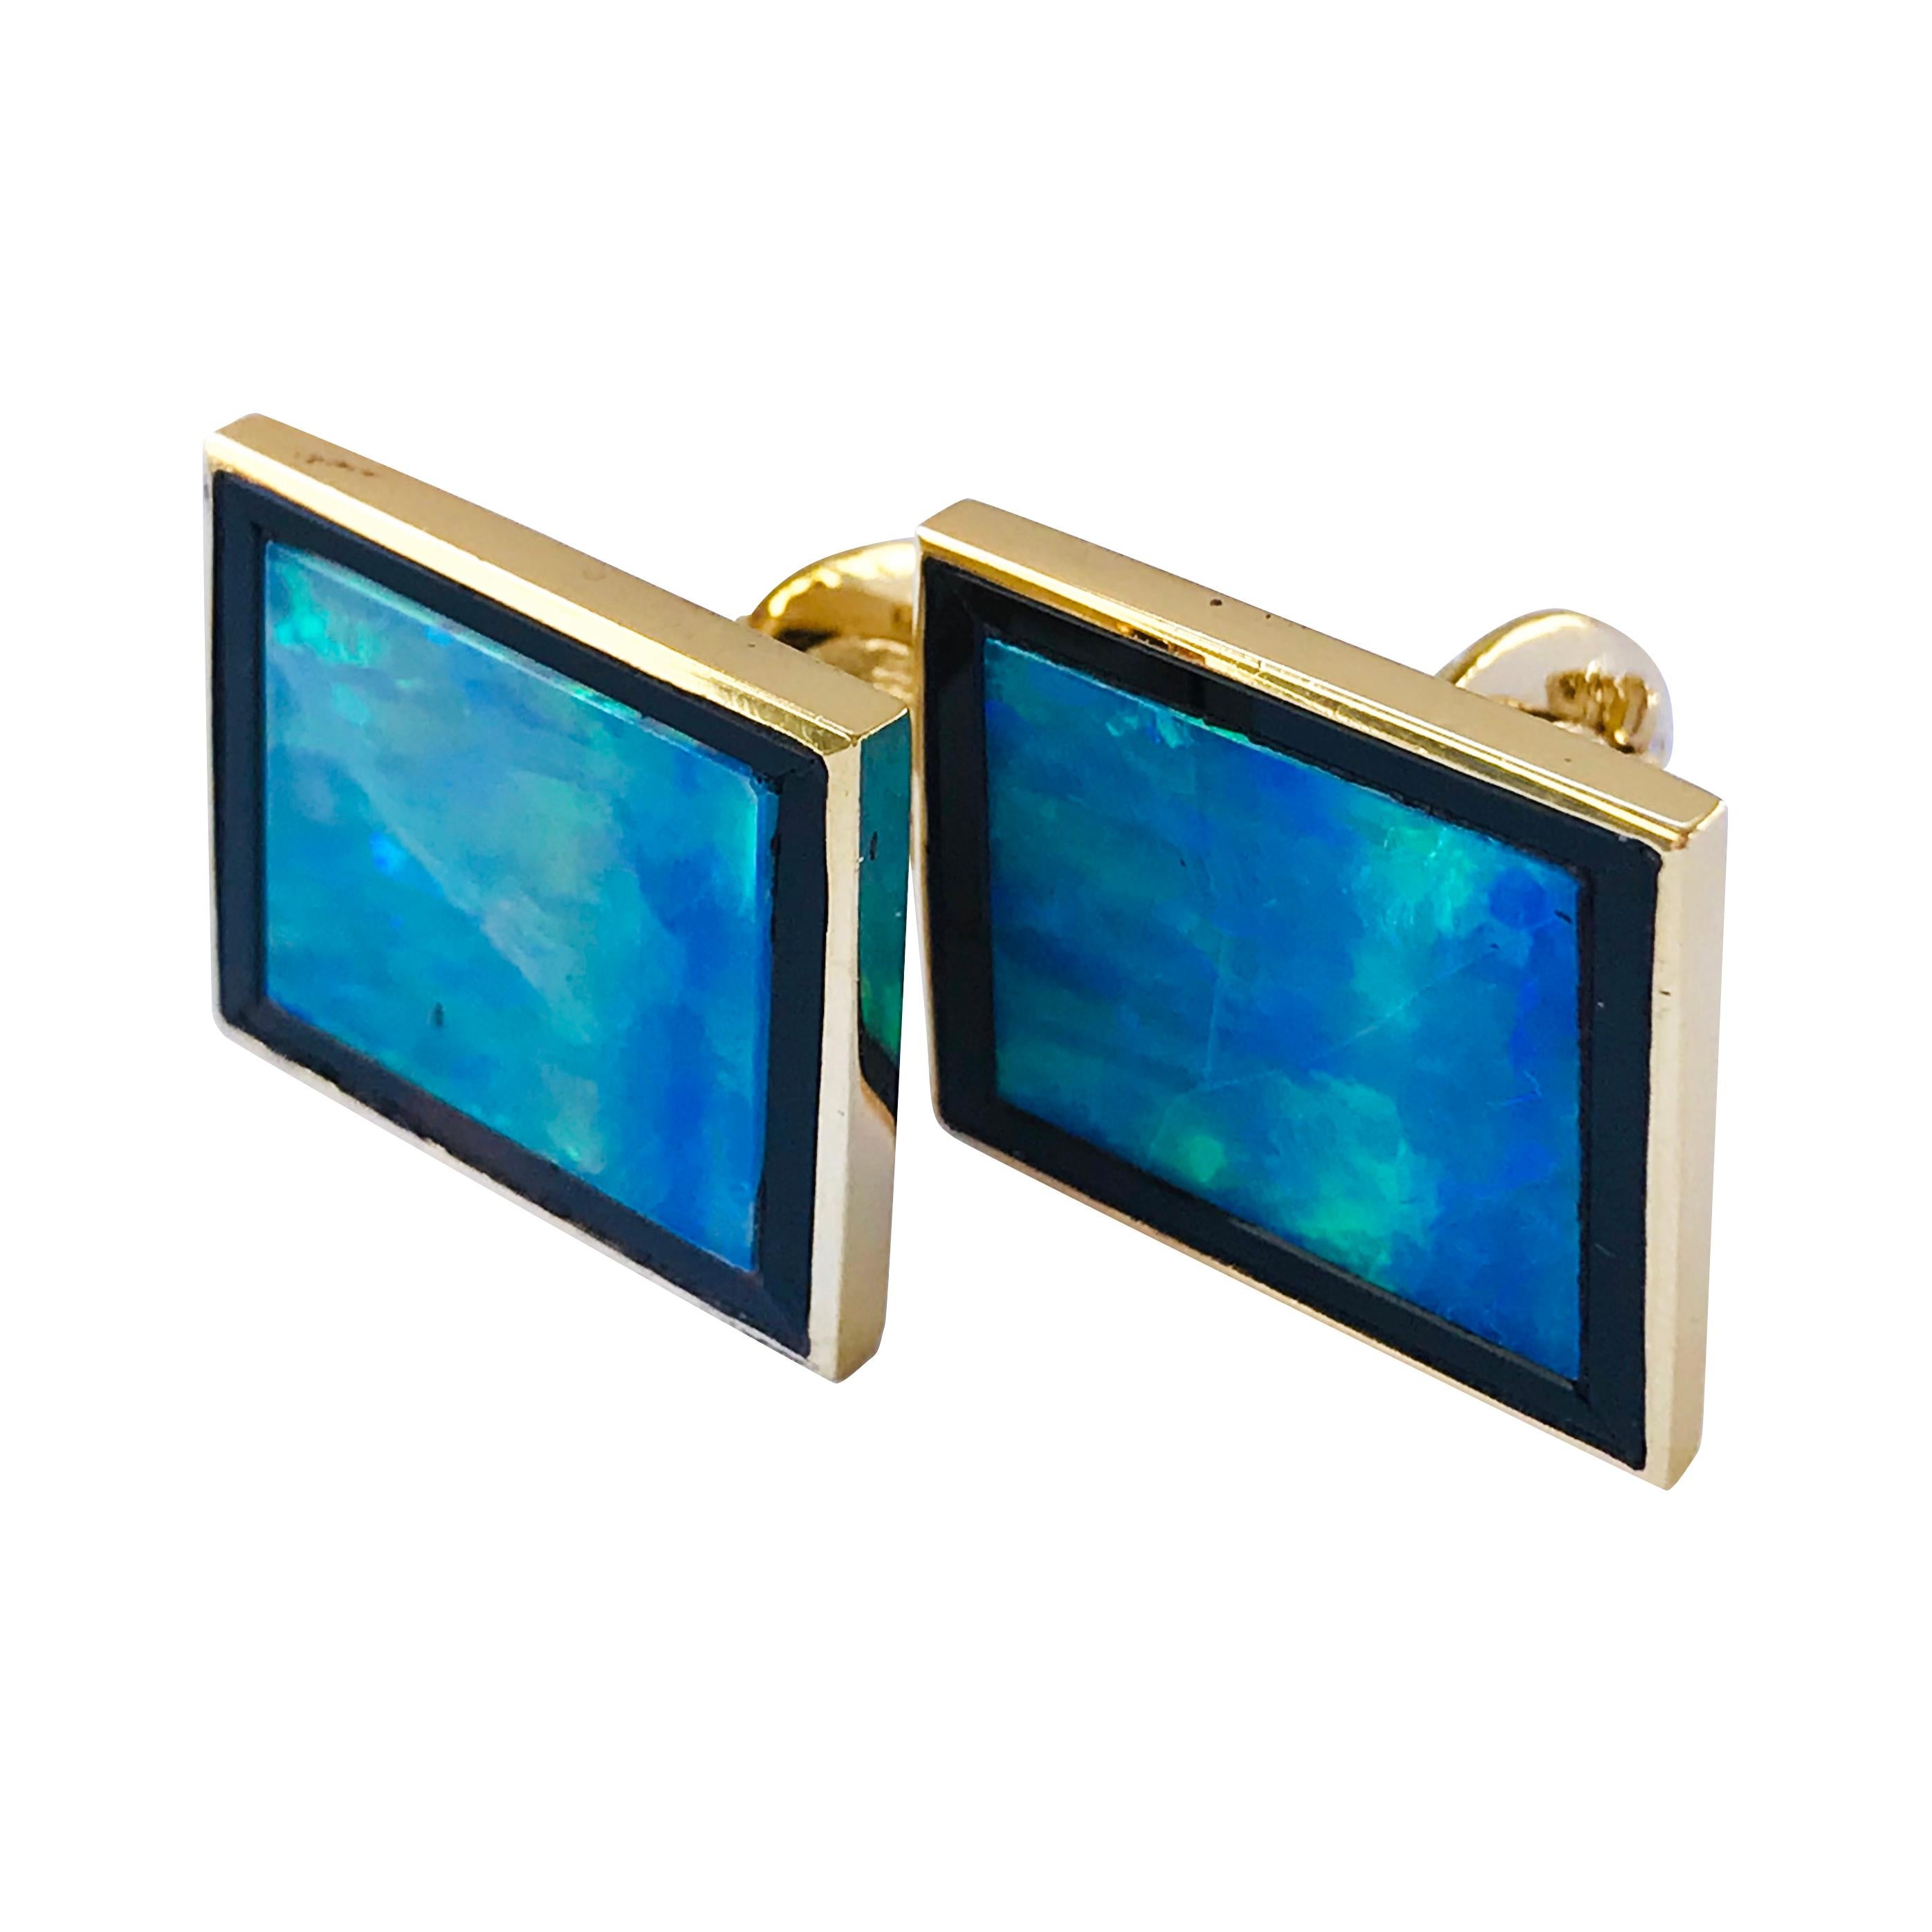 14 Karat Australian Black Opal Rectangular Cufflinks. The fronts feature a rectangular Black Australian Opal bezel-set with a black Onyx surround. Quality is A: Dark grey to black background, good to medium play of color with at least two